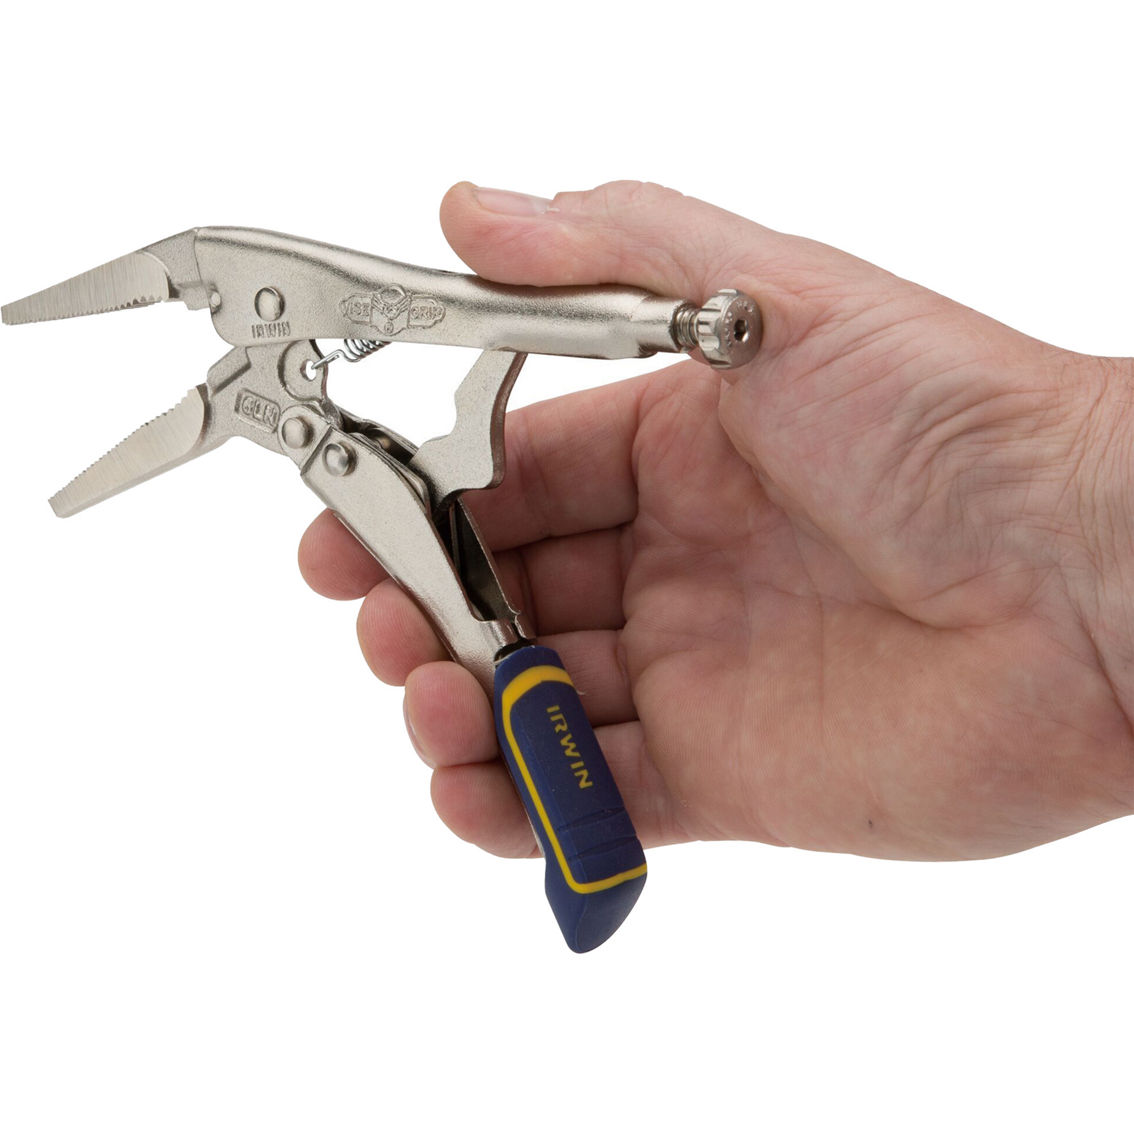 Irwin 6 in. Lock Long Nose Pliers - Image 2 of 2